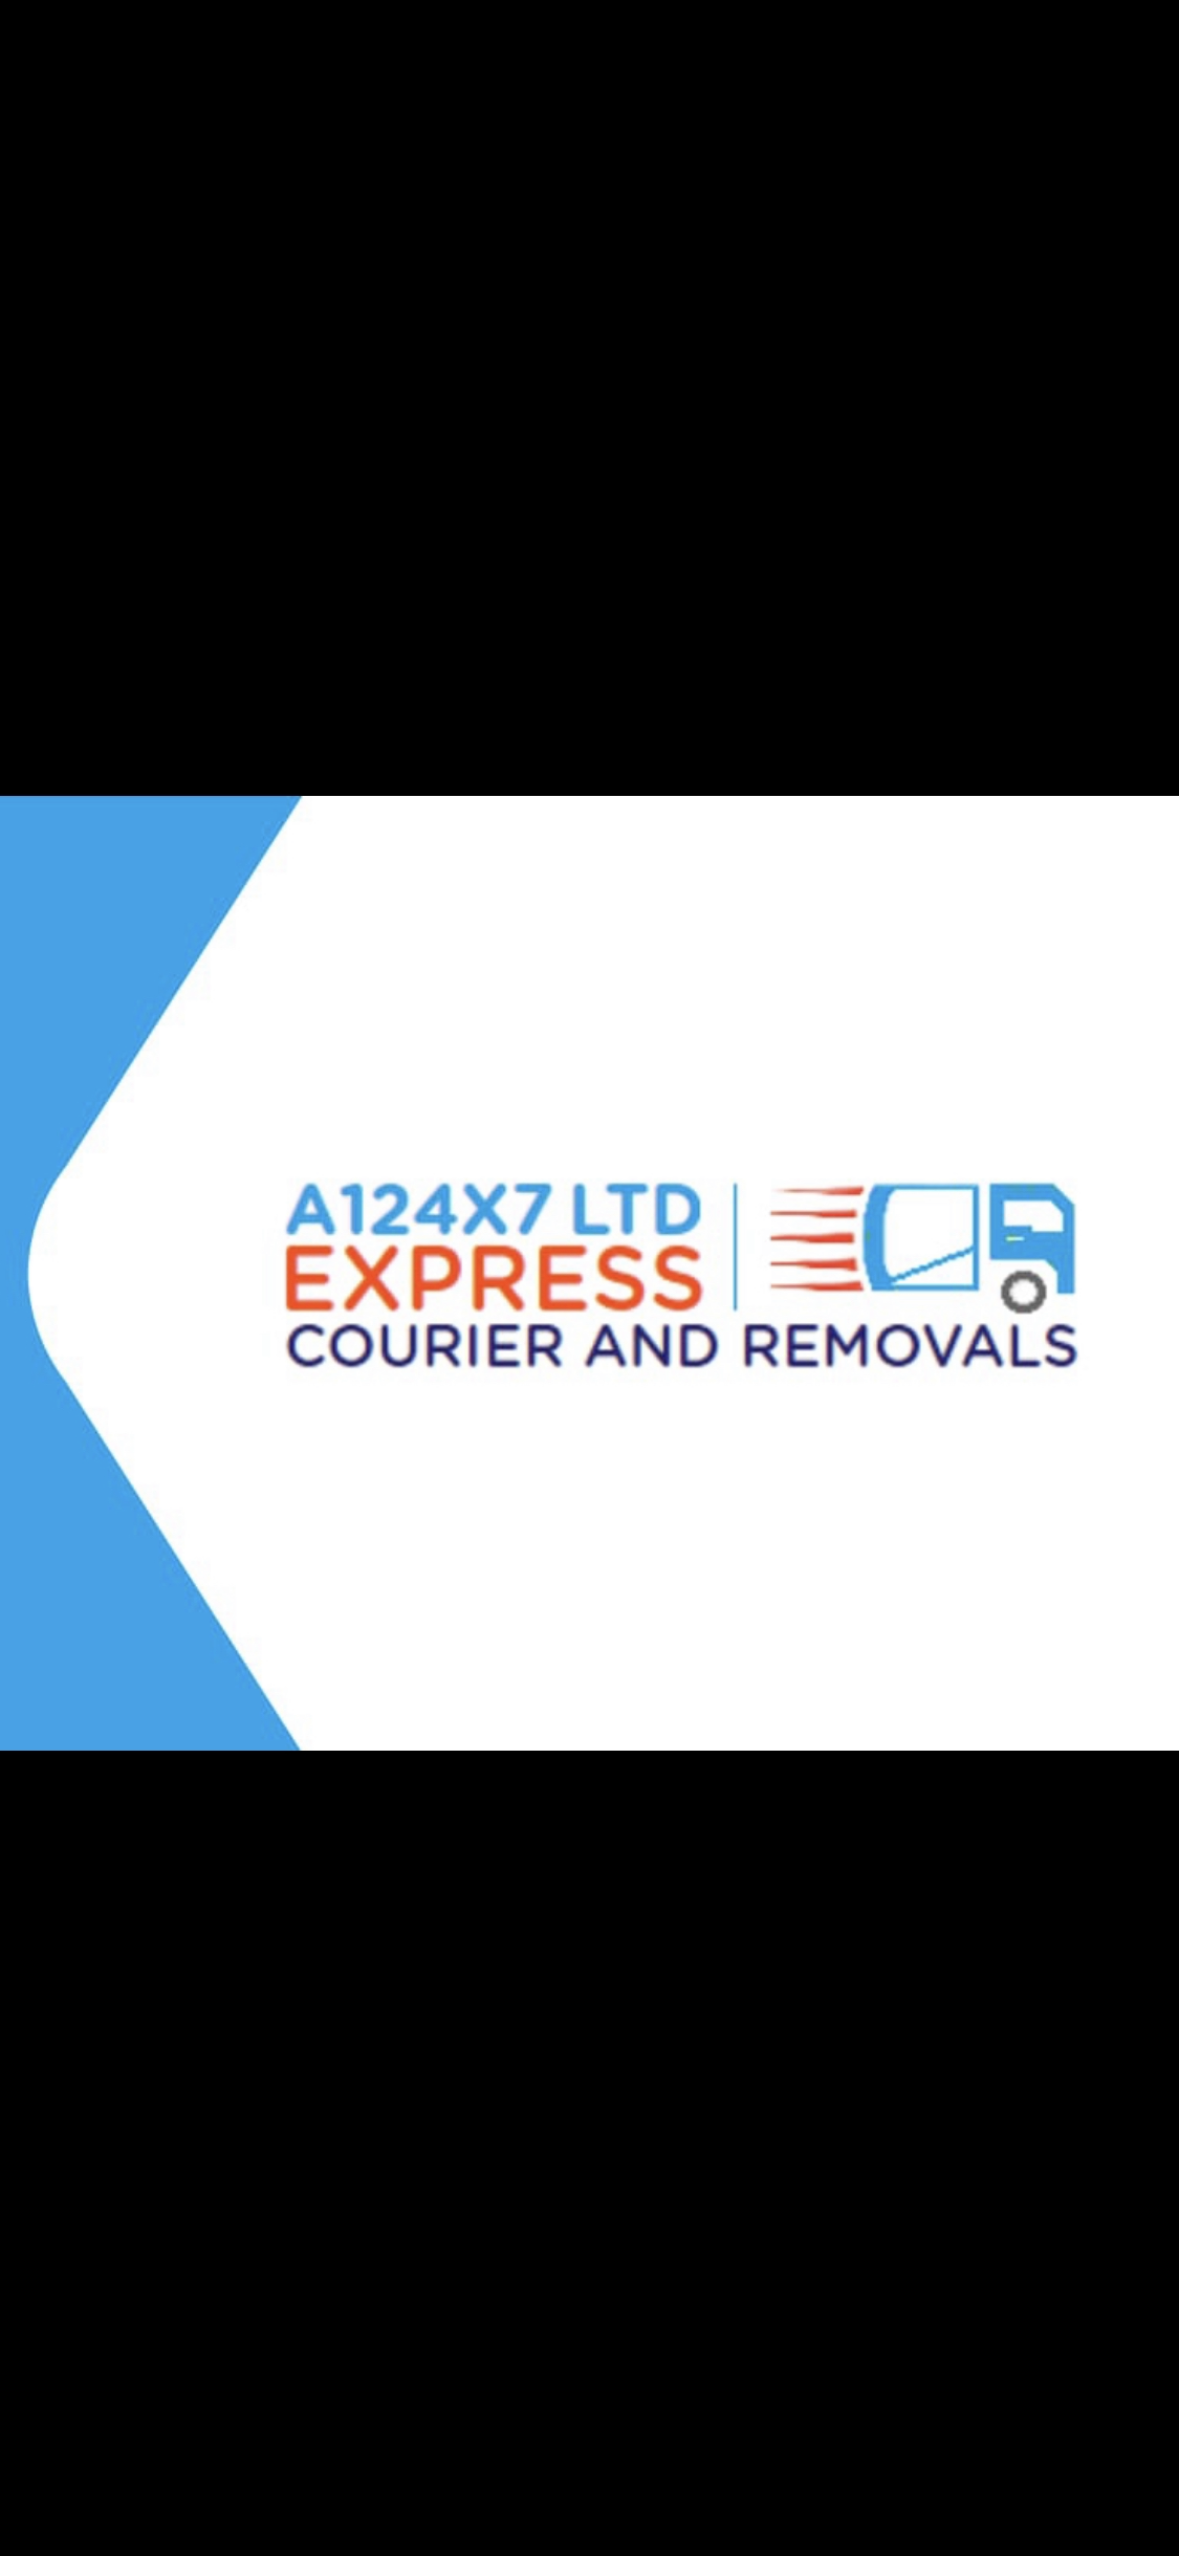 Logo of A124X7 Ltd Couriers In Tower Hamlets, London